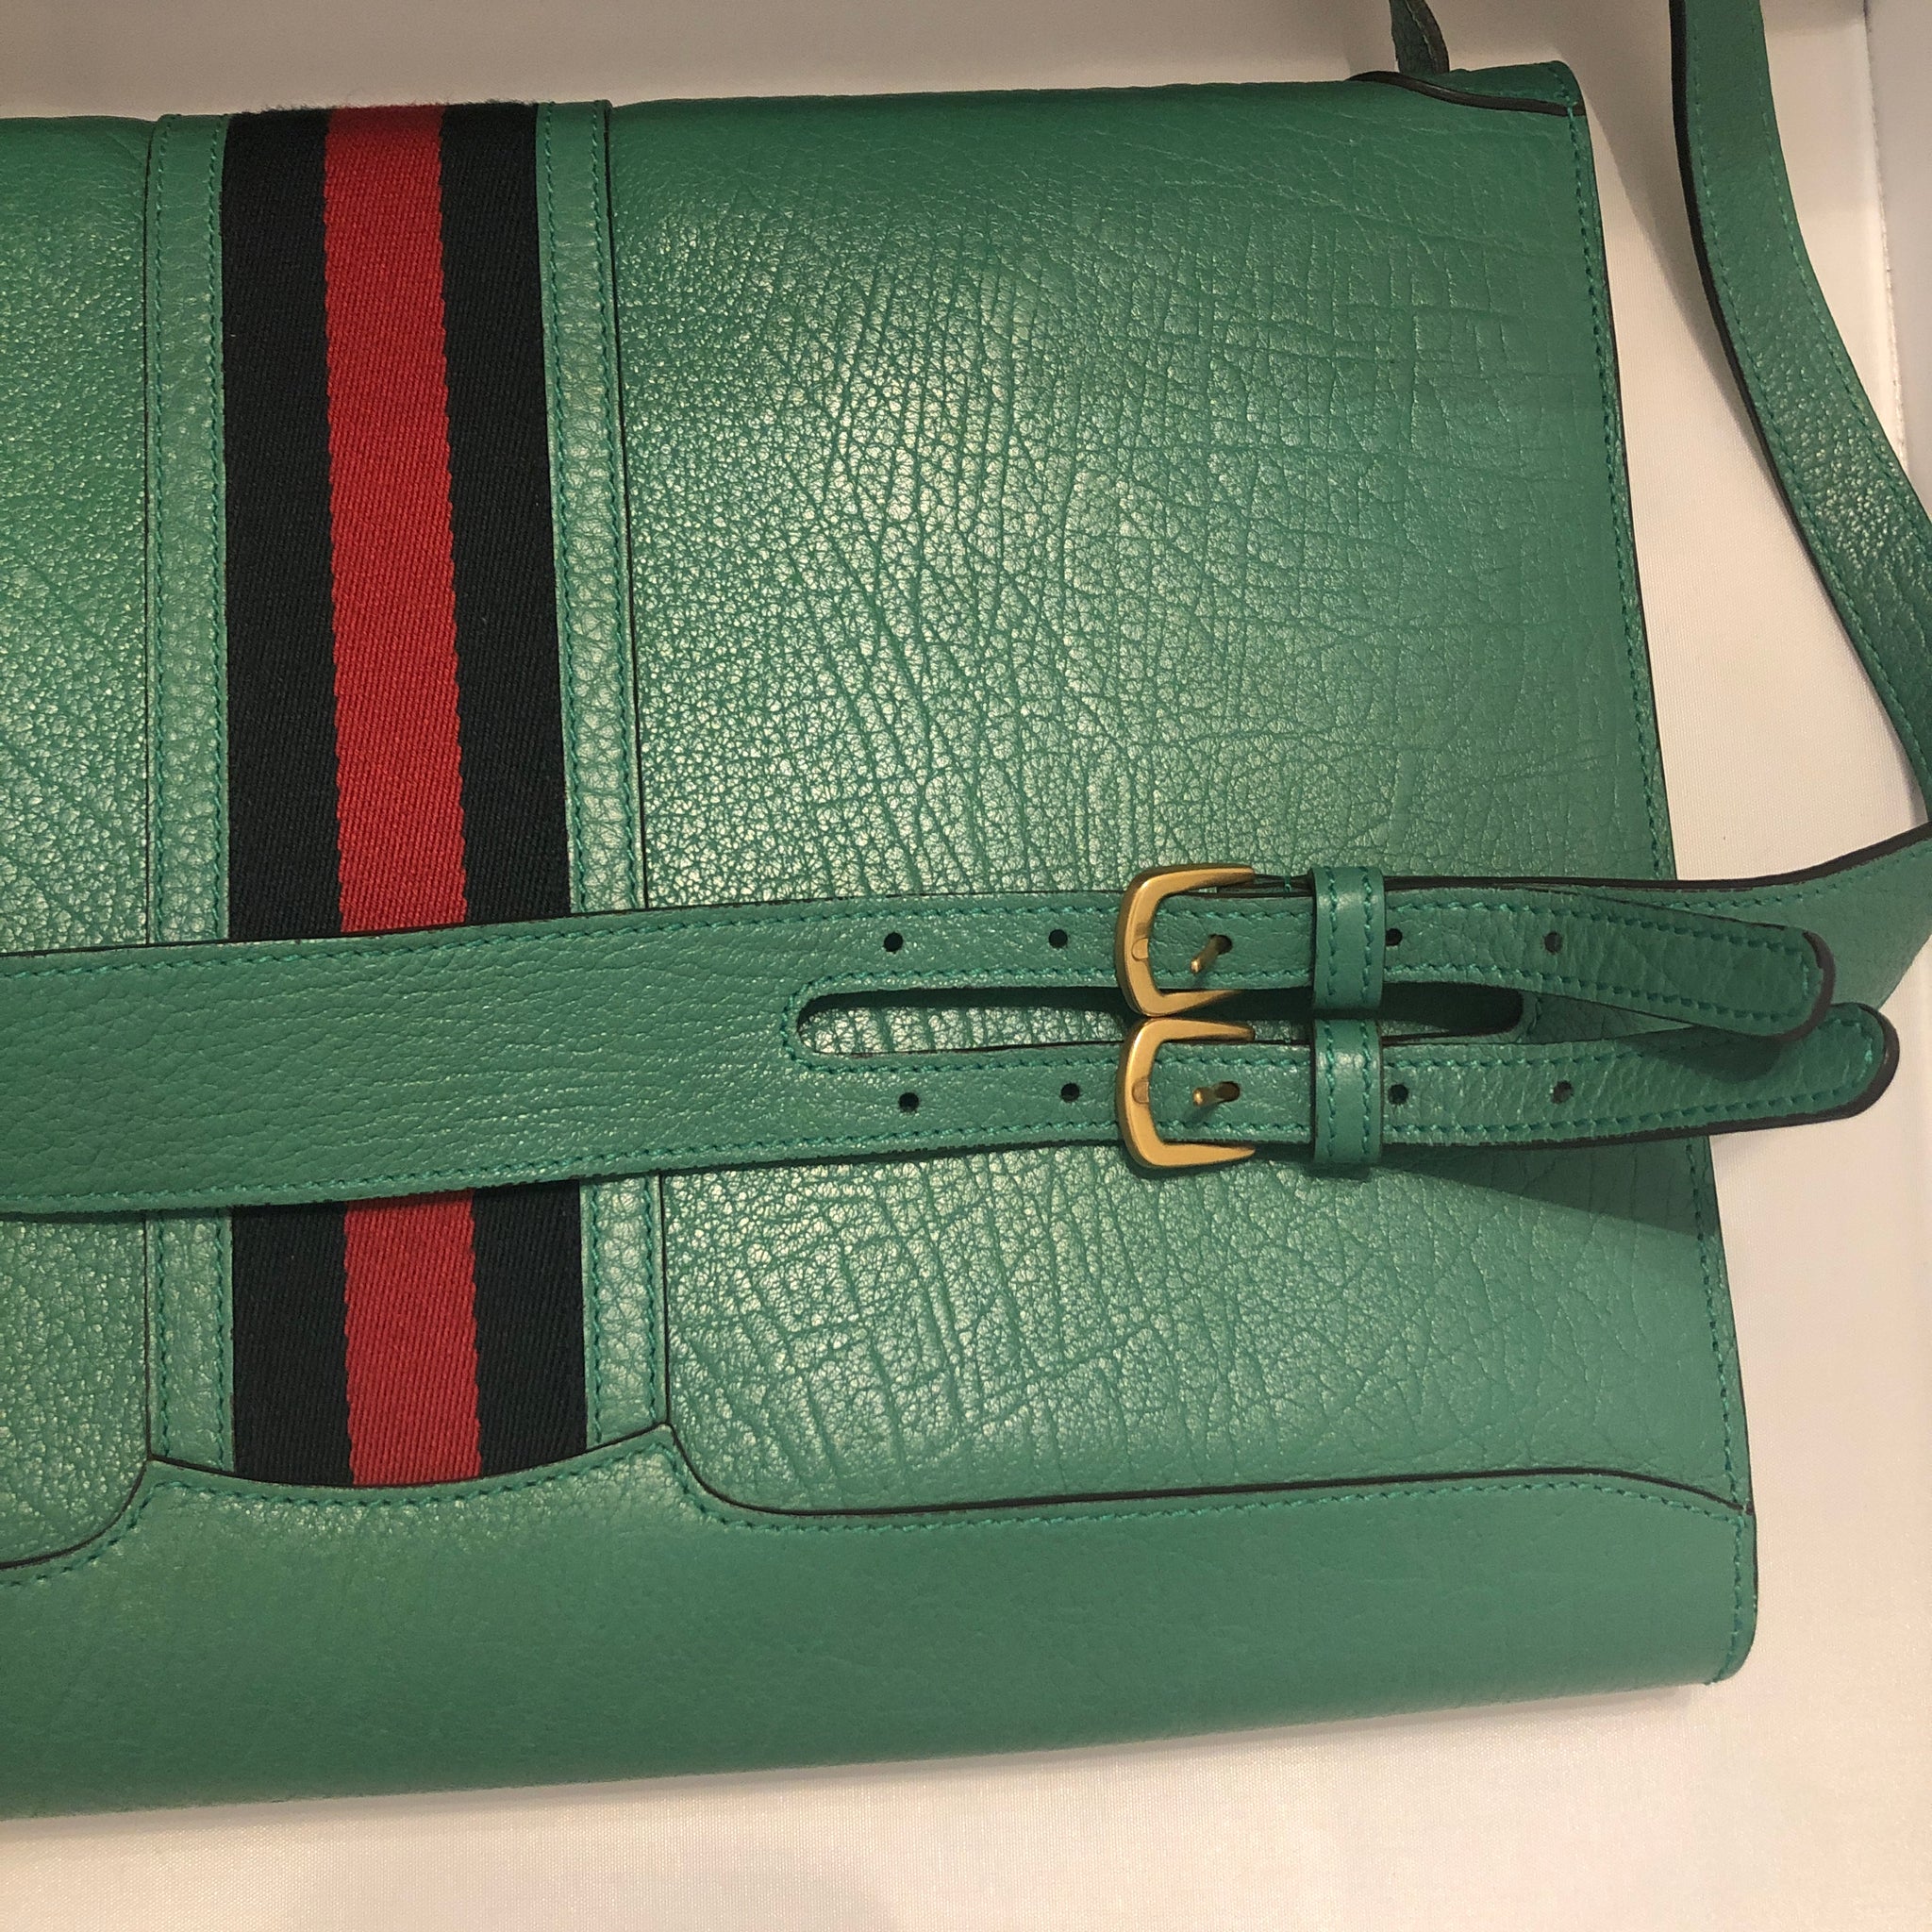 Image result for gucci crossbody bag with green and red strap